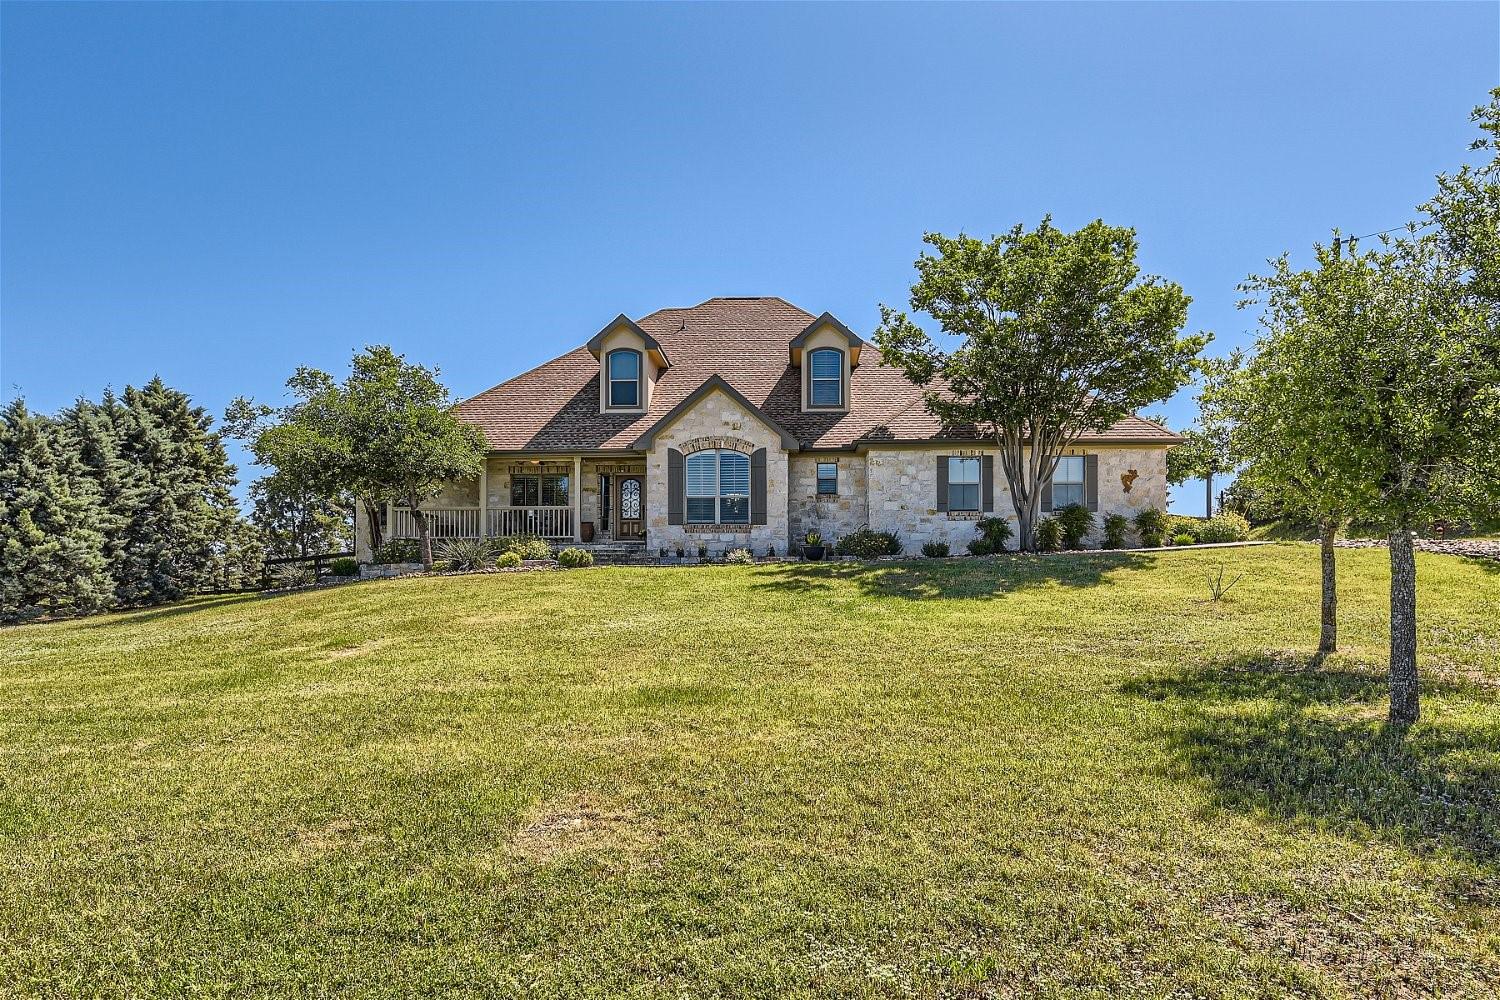 View Dripping Springs, TX 78620 house